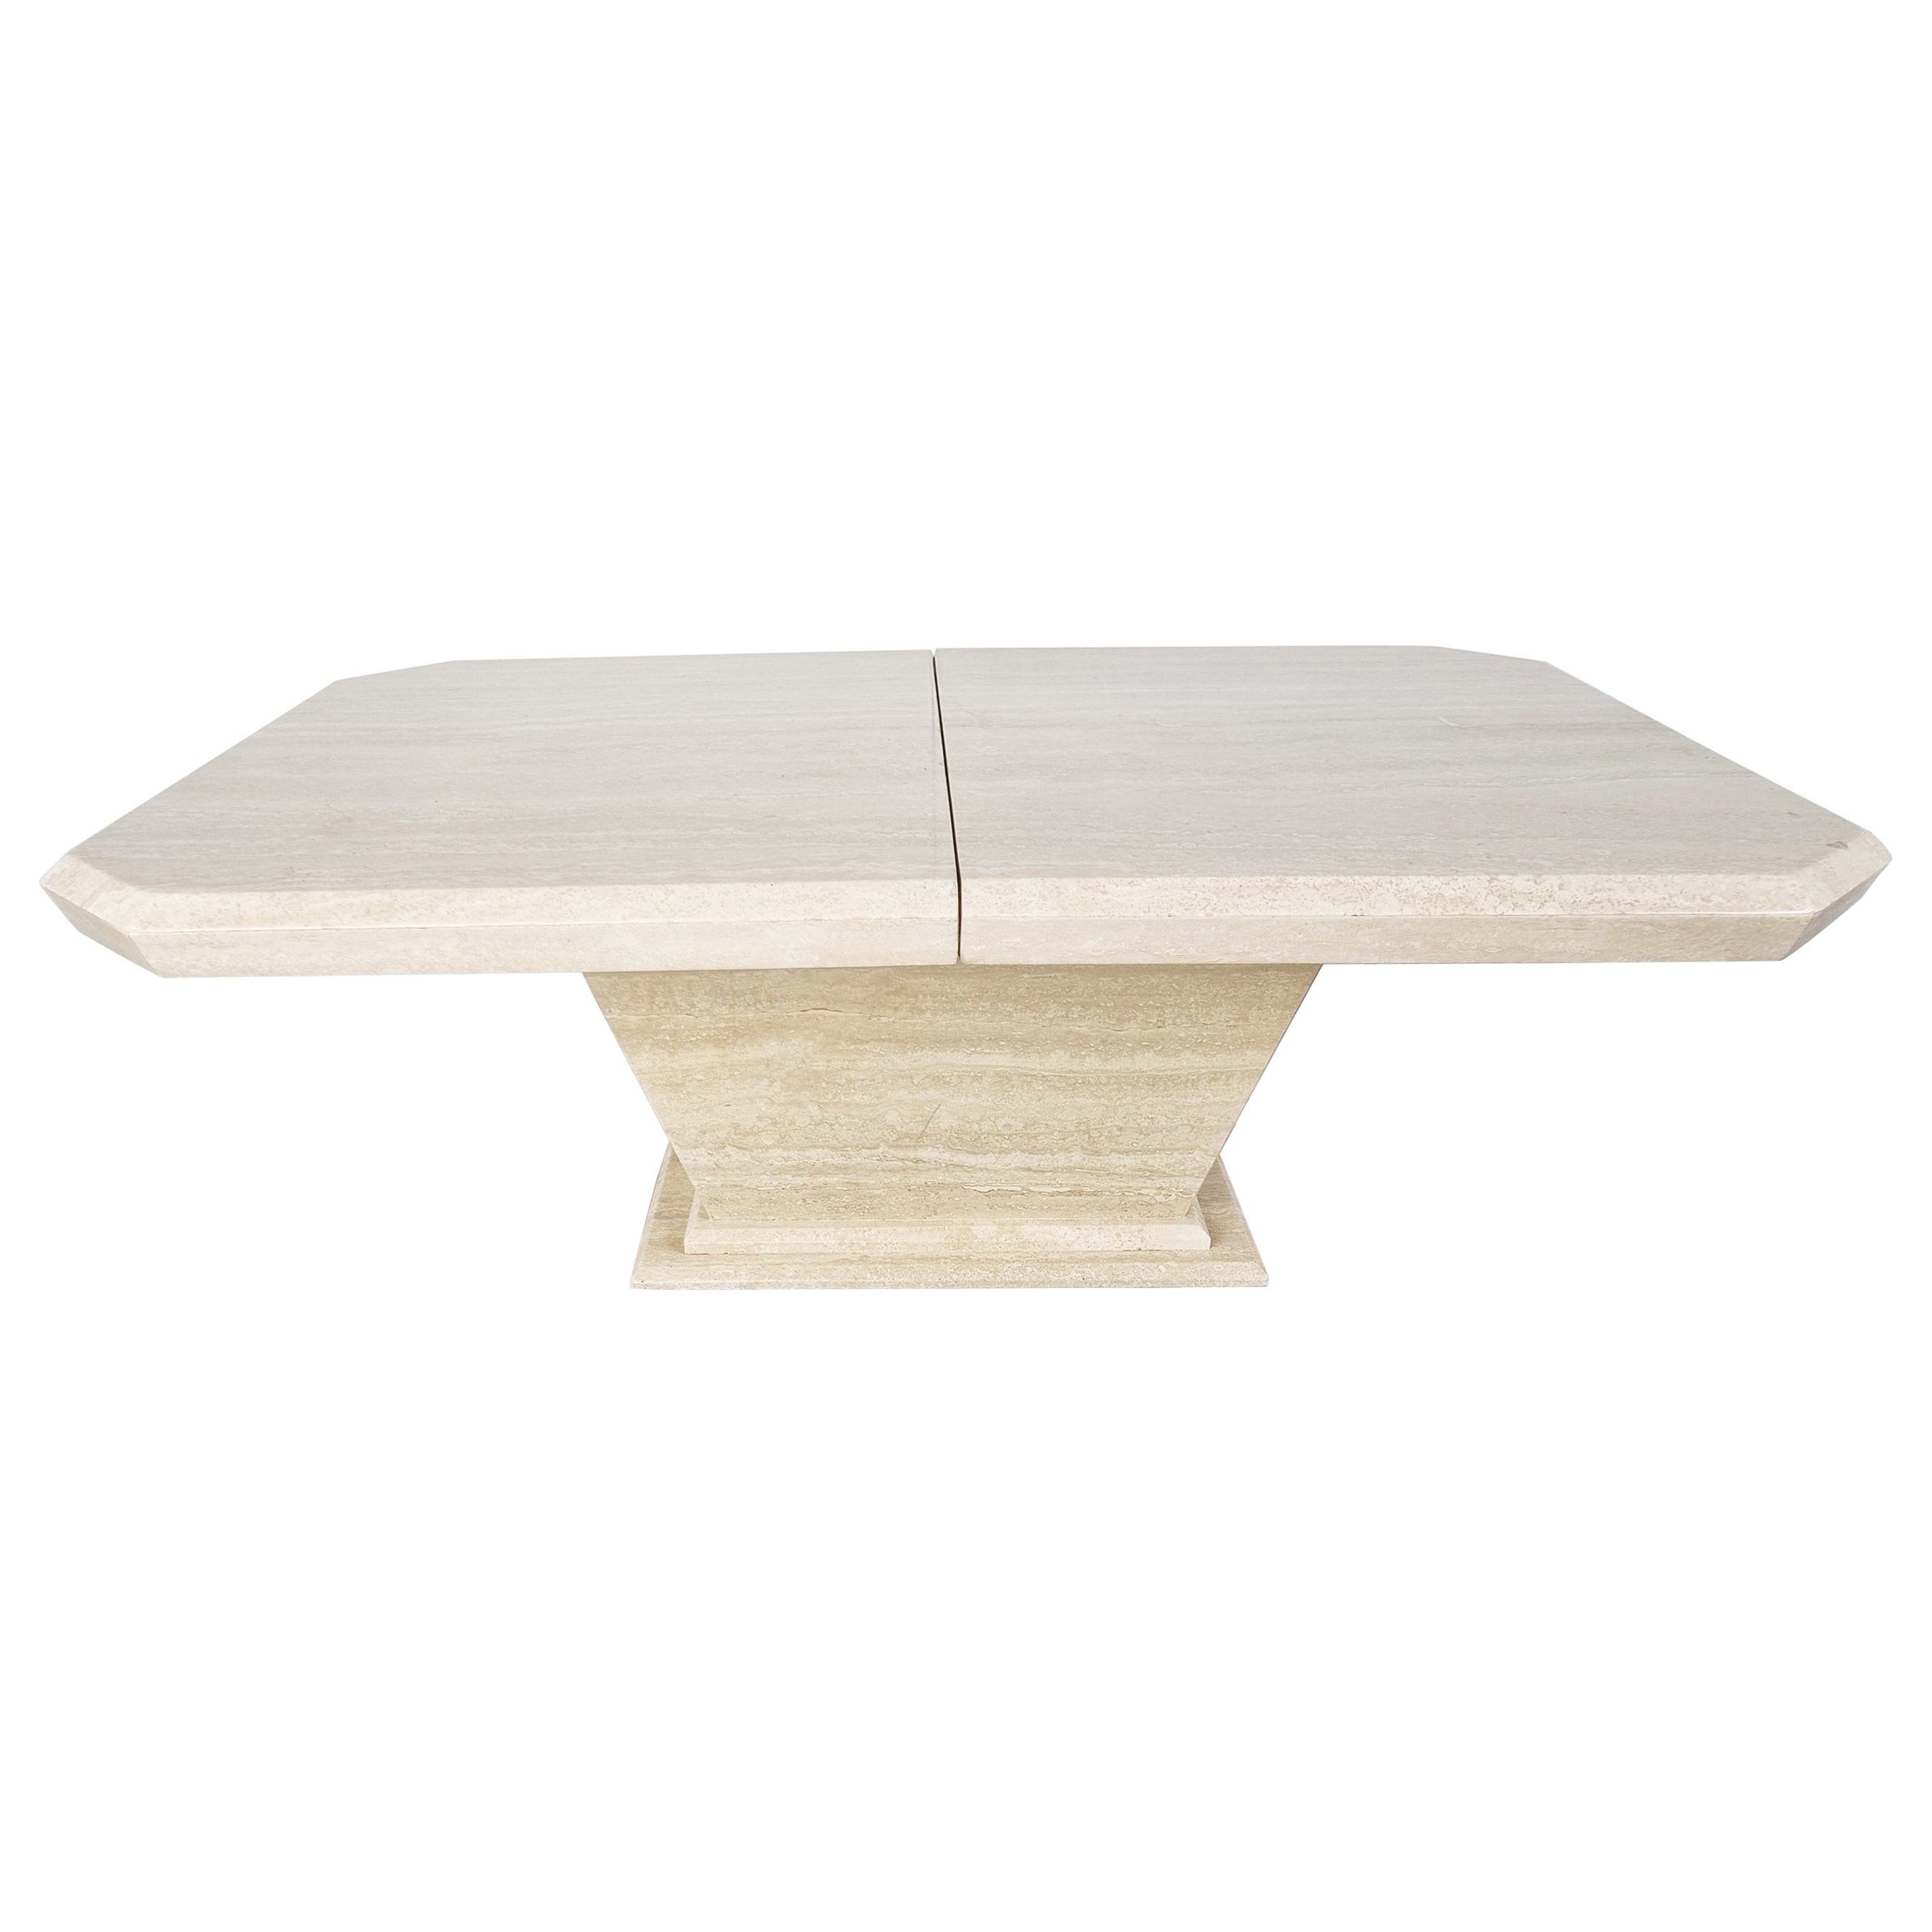 Vintage Travertine Hidden Bar Coffee Table, 1970s For Sale